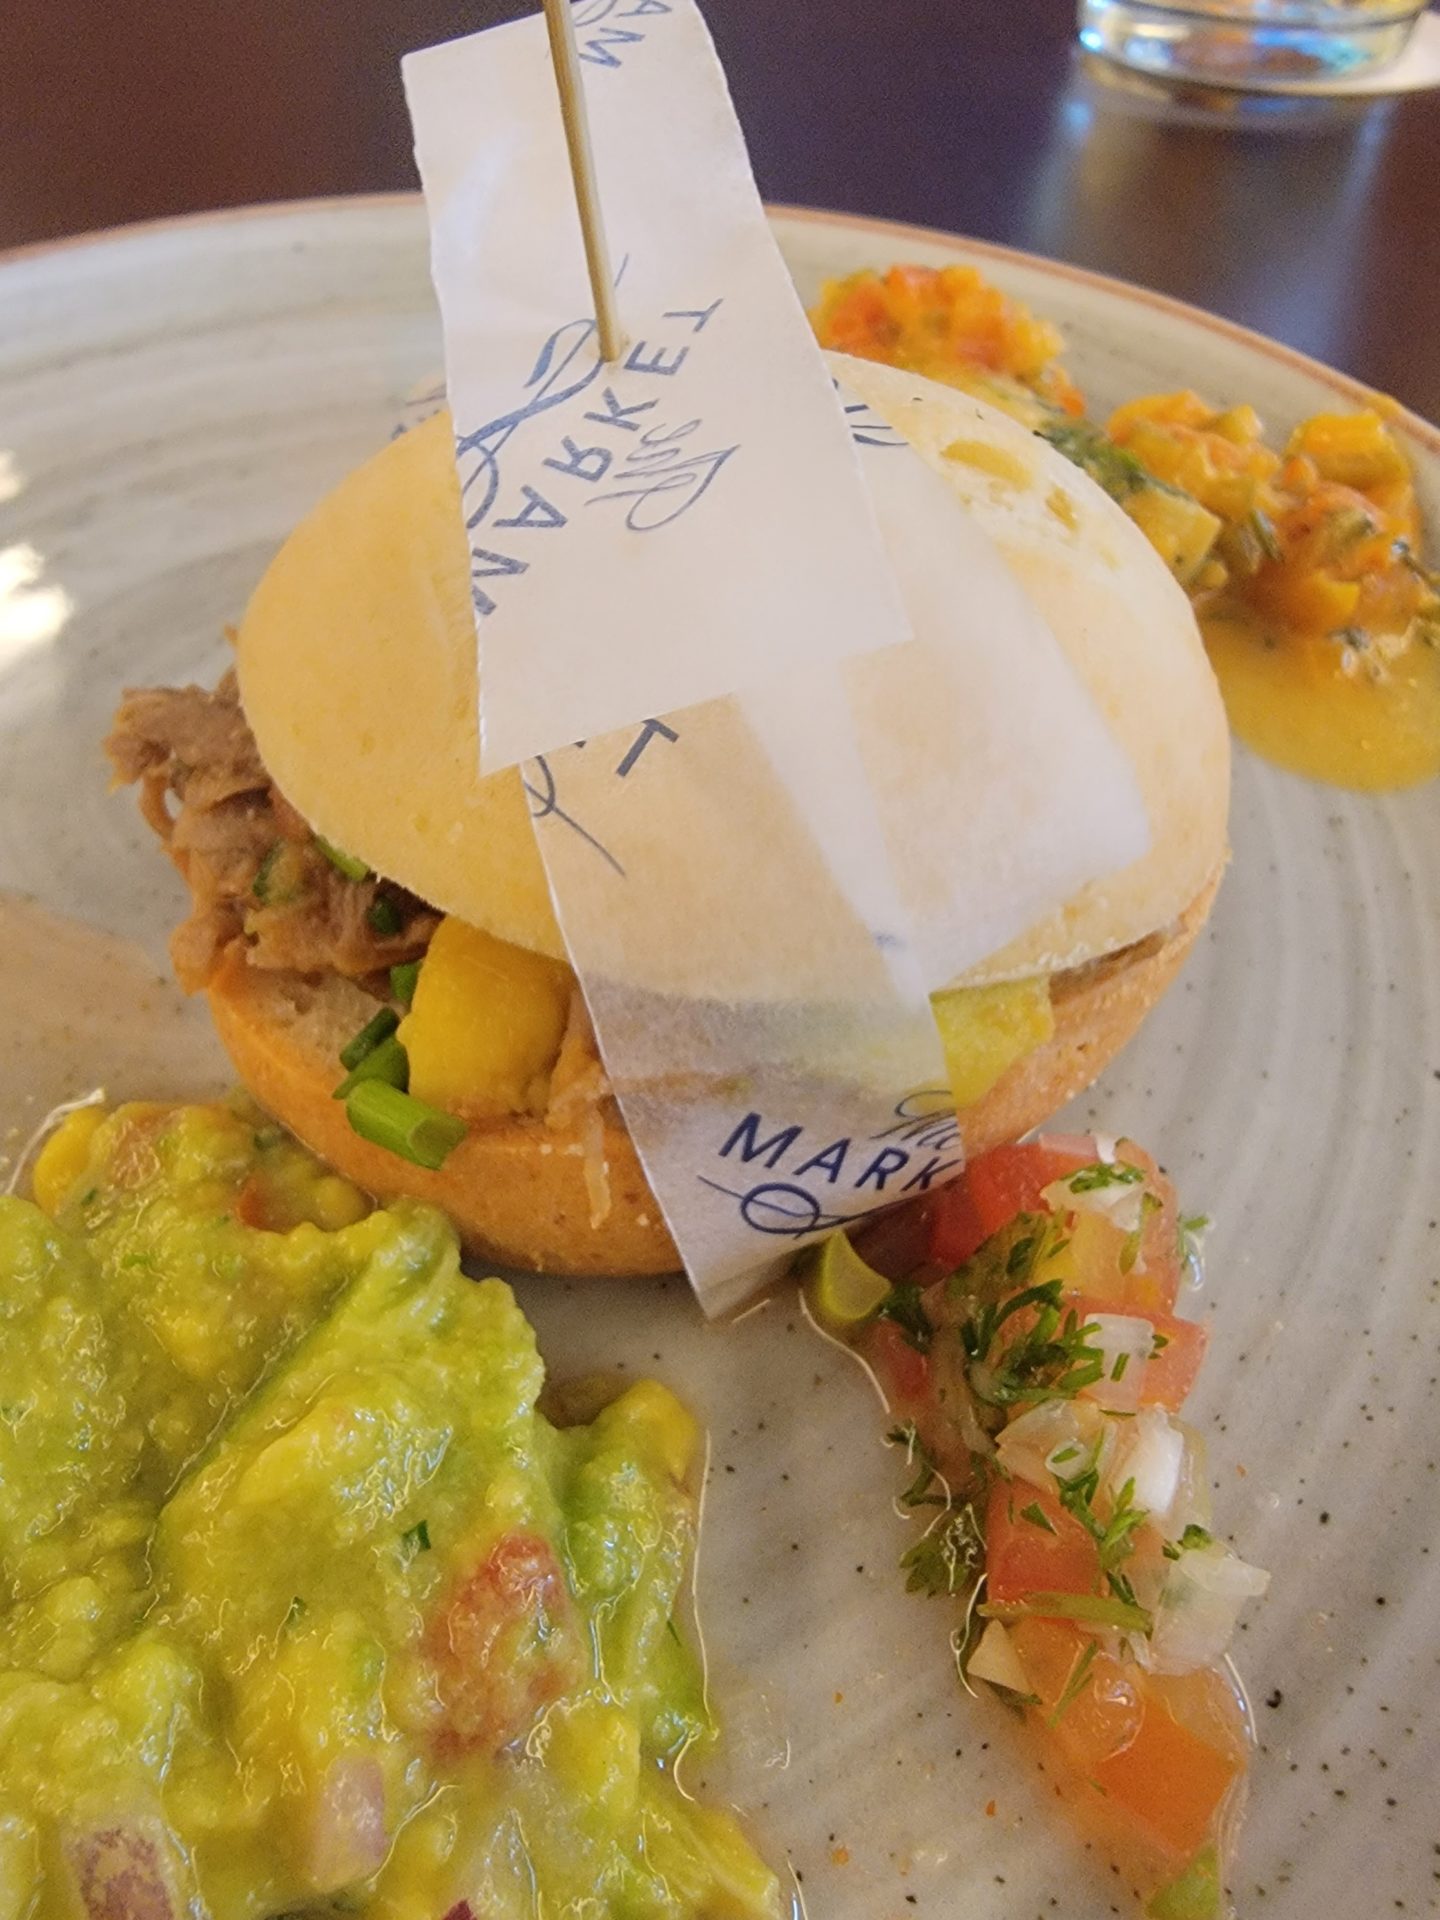 a plate of food with a small sandwich and guacamole